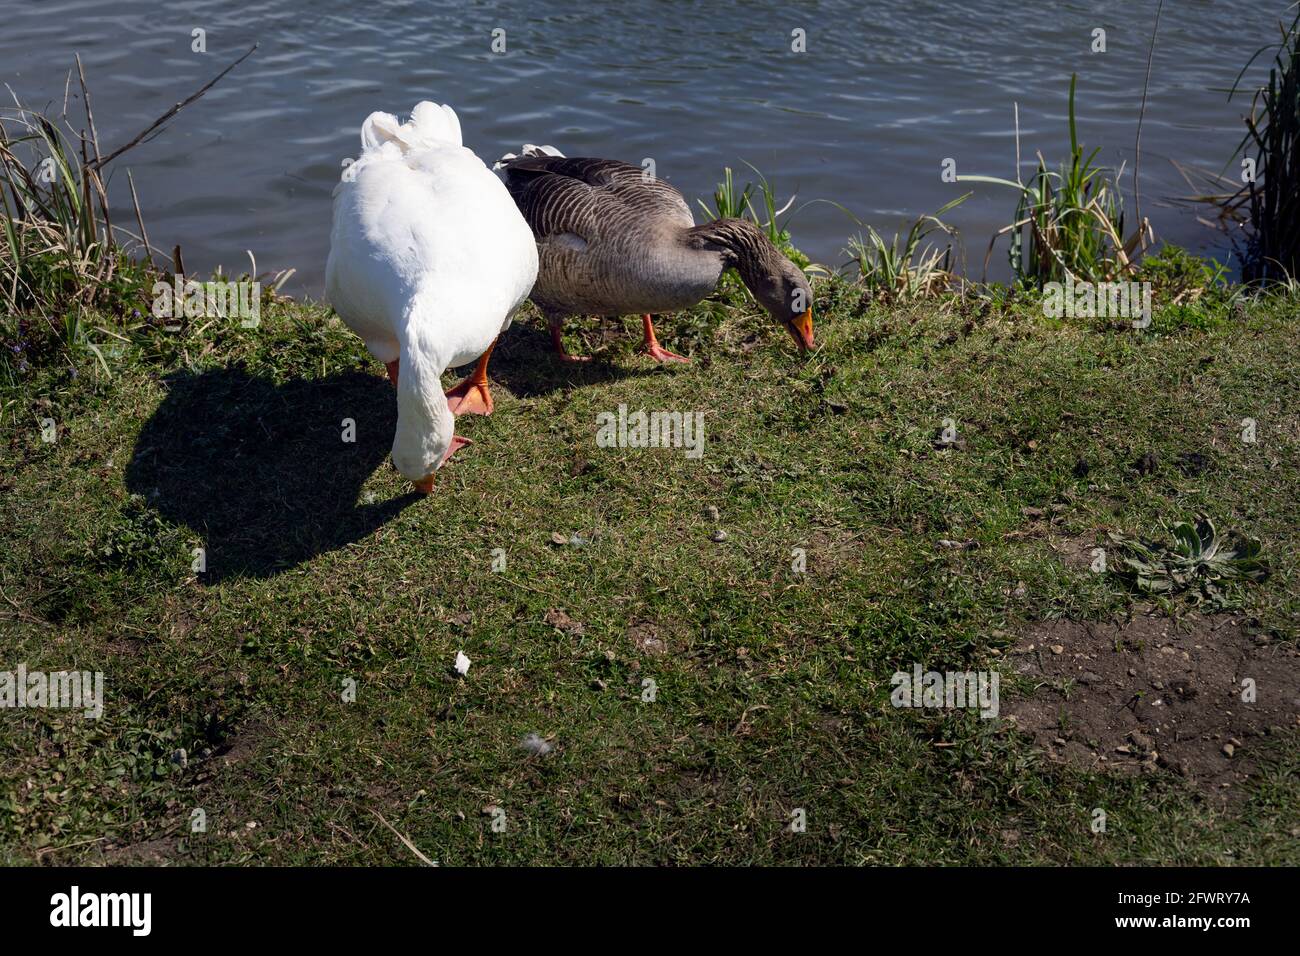 Two geese, one white and the other brown, grazing on the bank of the river Thames, England Stock Photo